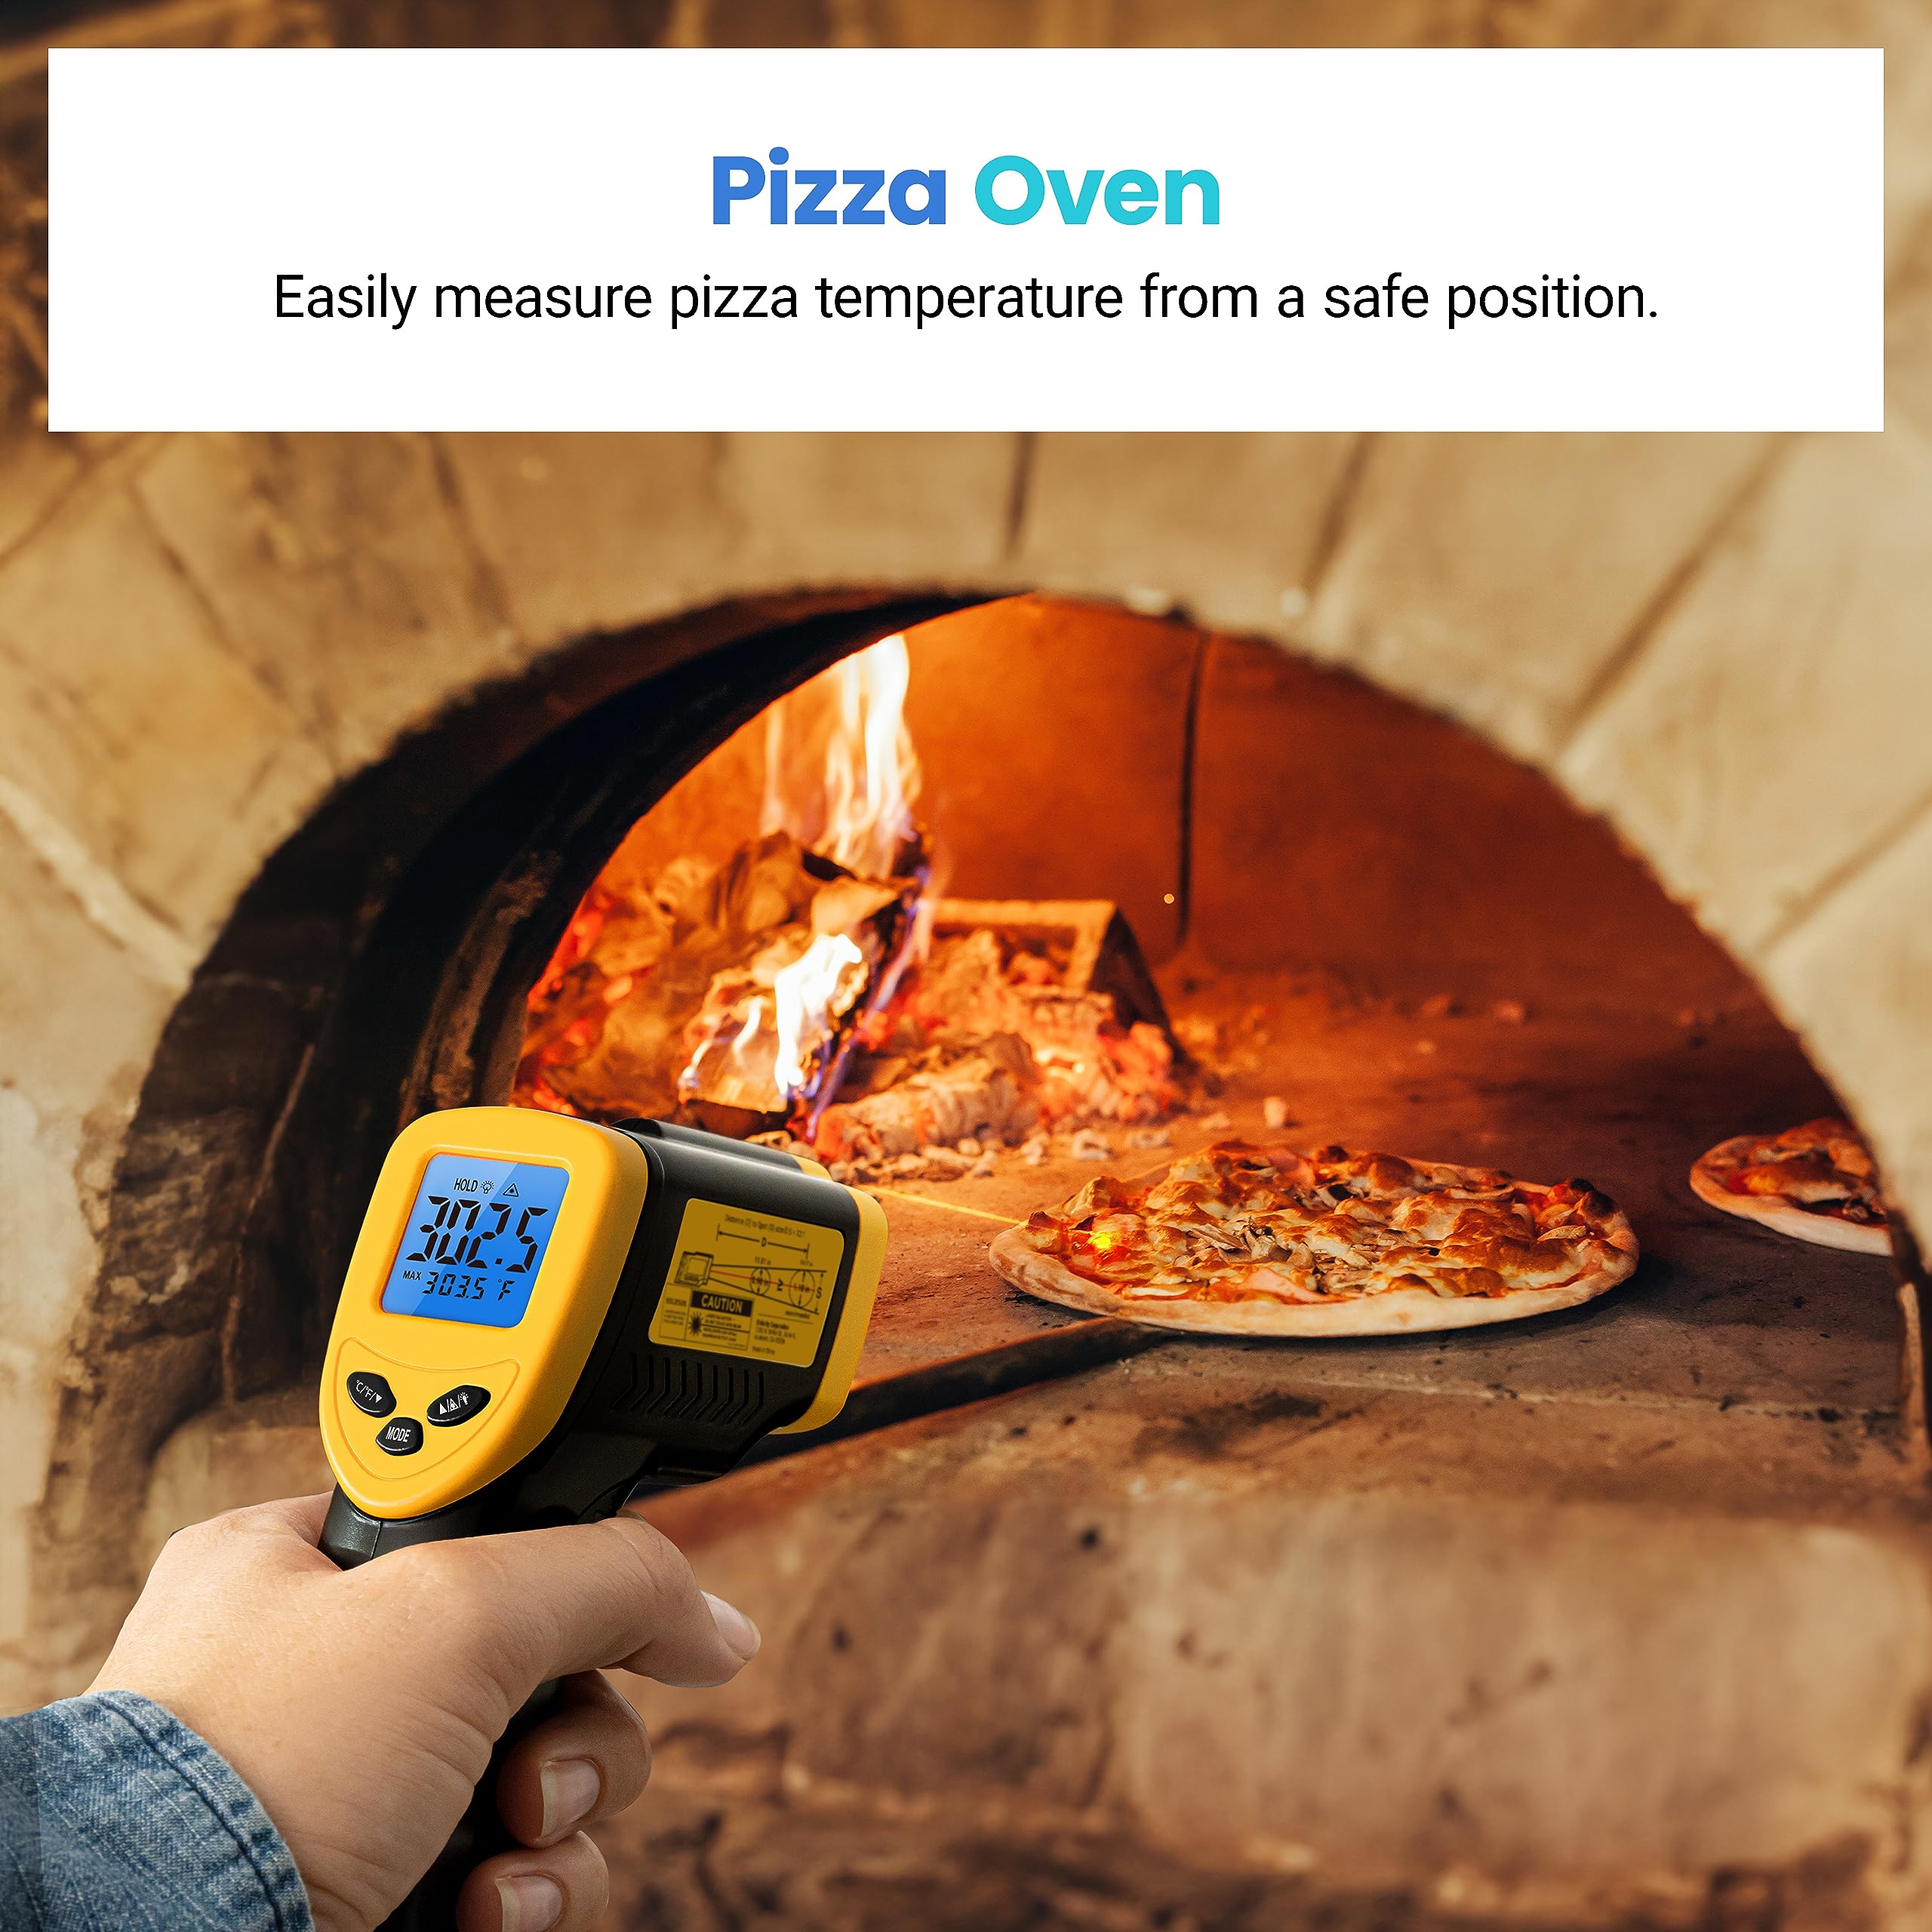 Etekcity Infrared Thermometer 1080, Pizza Oven, Blackstone Accessories, Temperature Temp Gun for Cooking, Laser Pool Surface Tool for Kitchen, HVAC, Griddle, Grill, -58°F to 1130°F, Yellow